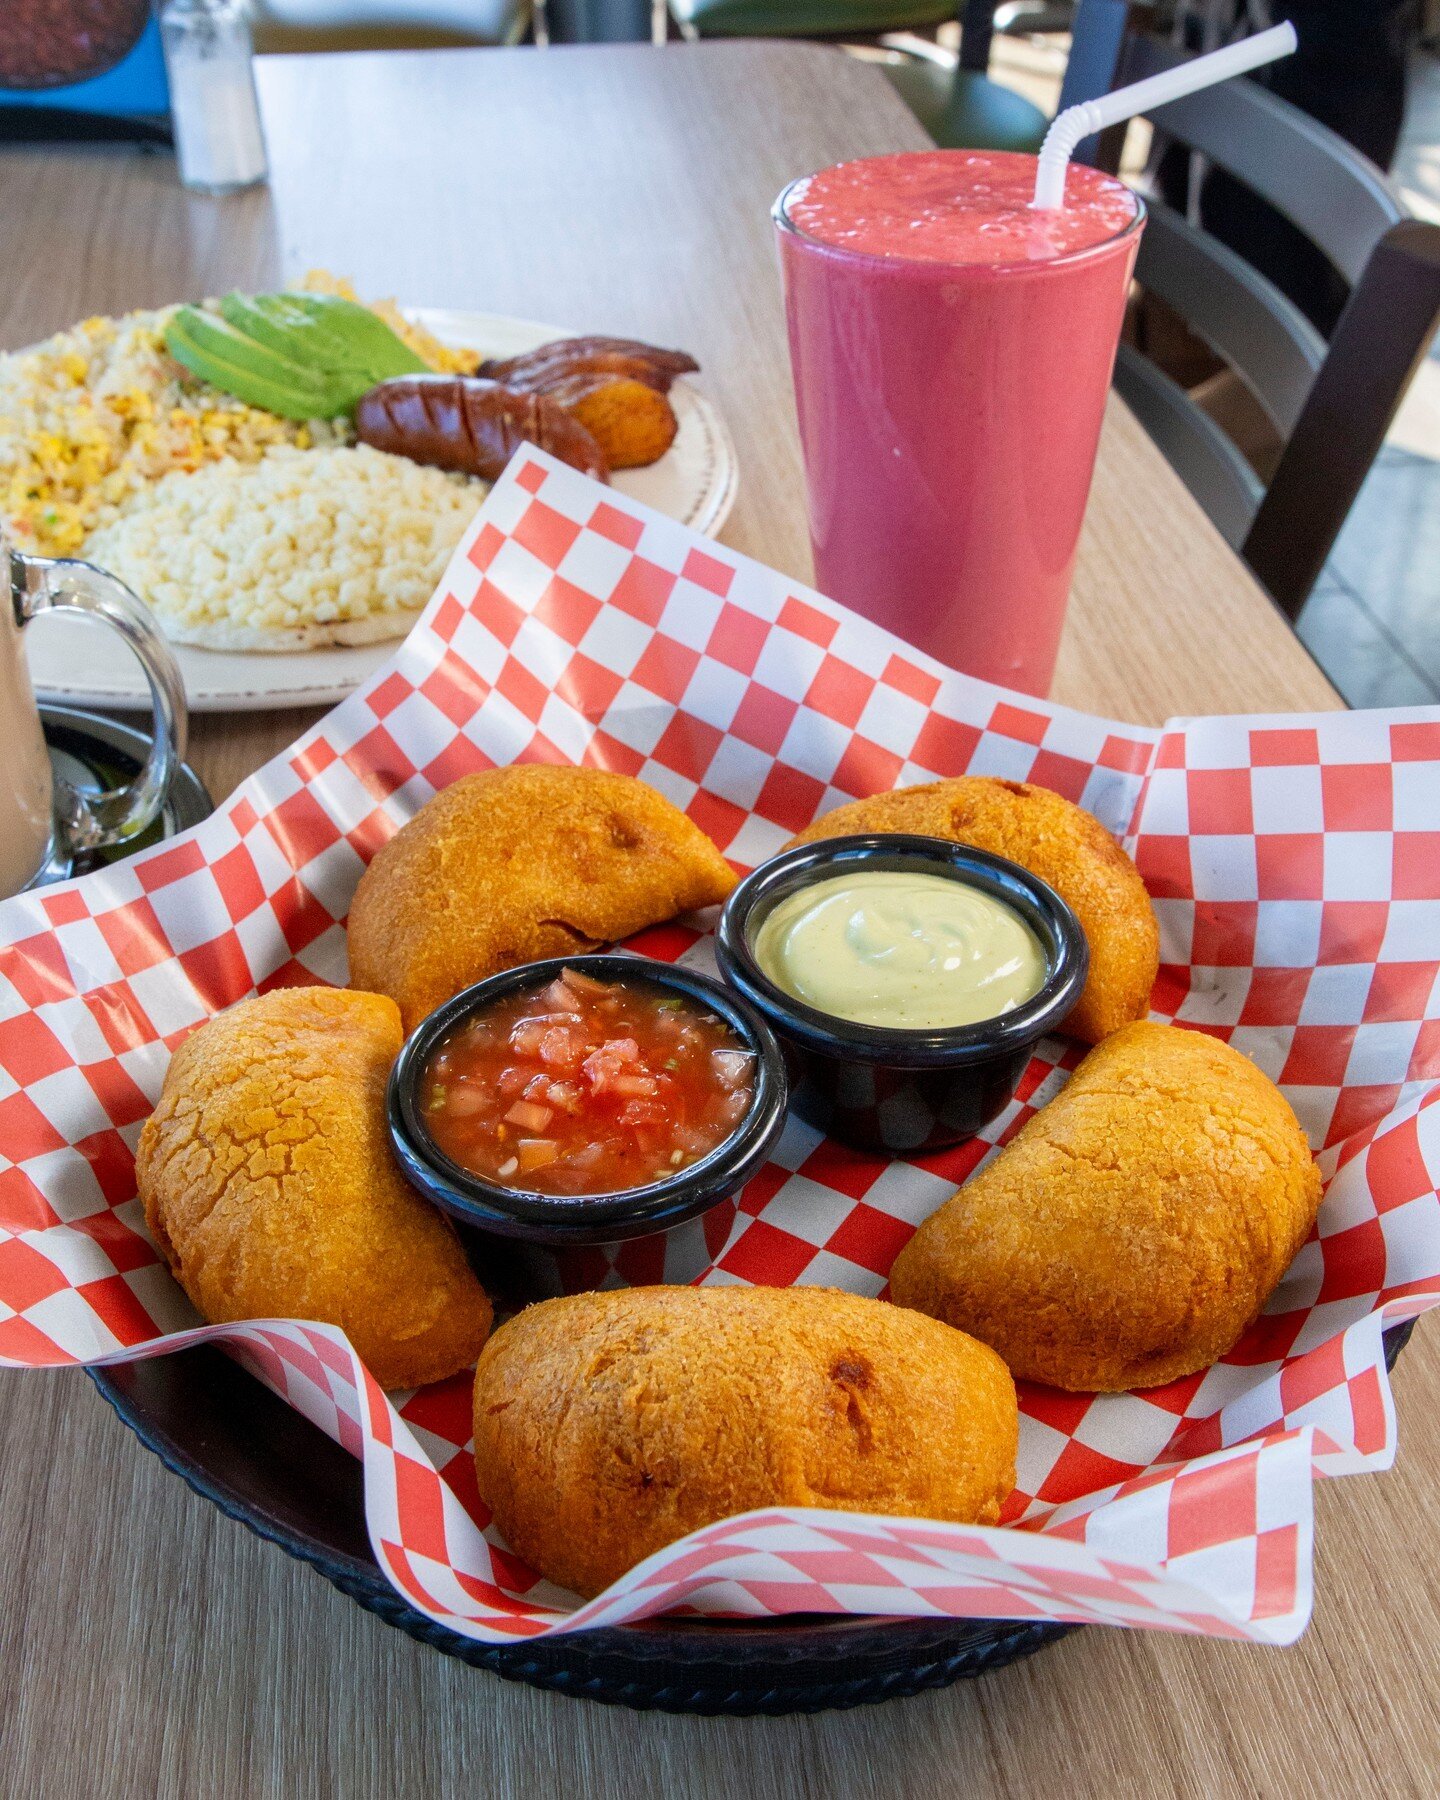 When these hit the table how could you resist them? 😉

#caliclt #cltfood #cltrestaurants #colombianfood #comidacolombiana #colombianrestaurant #cltfoodie #calicolombian